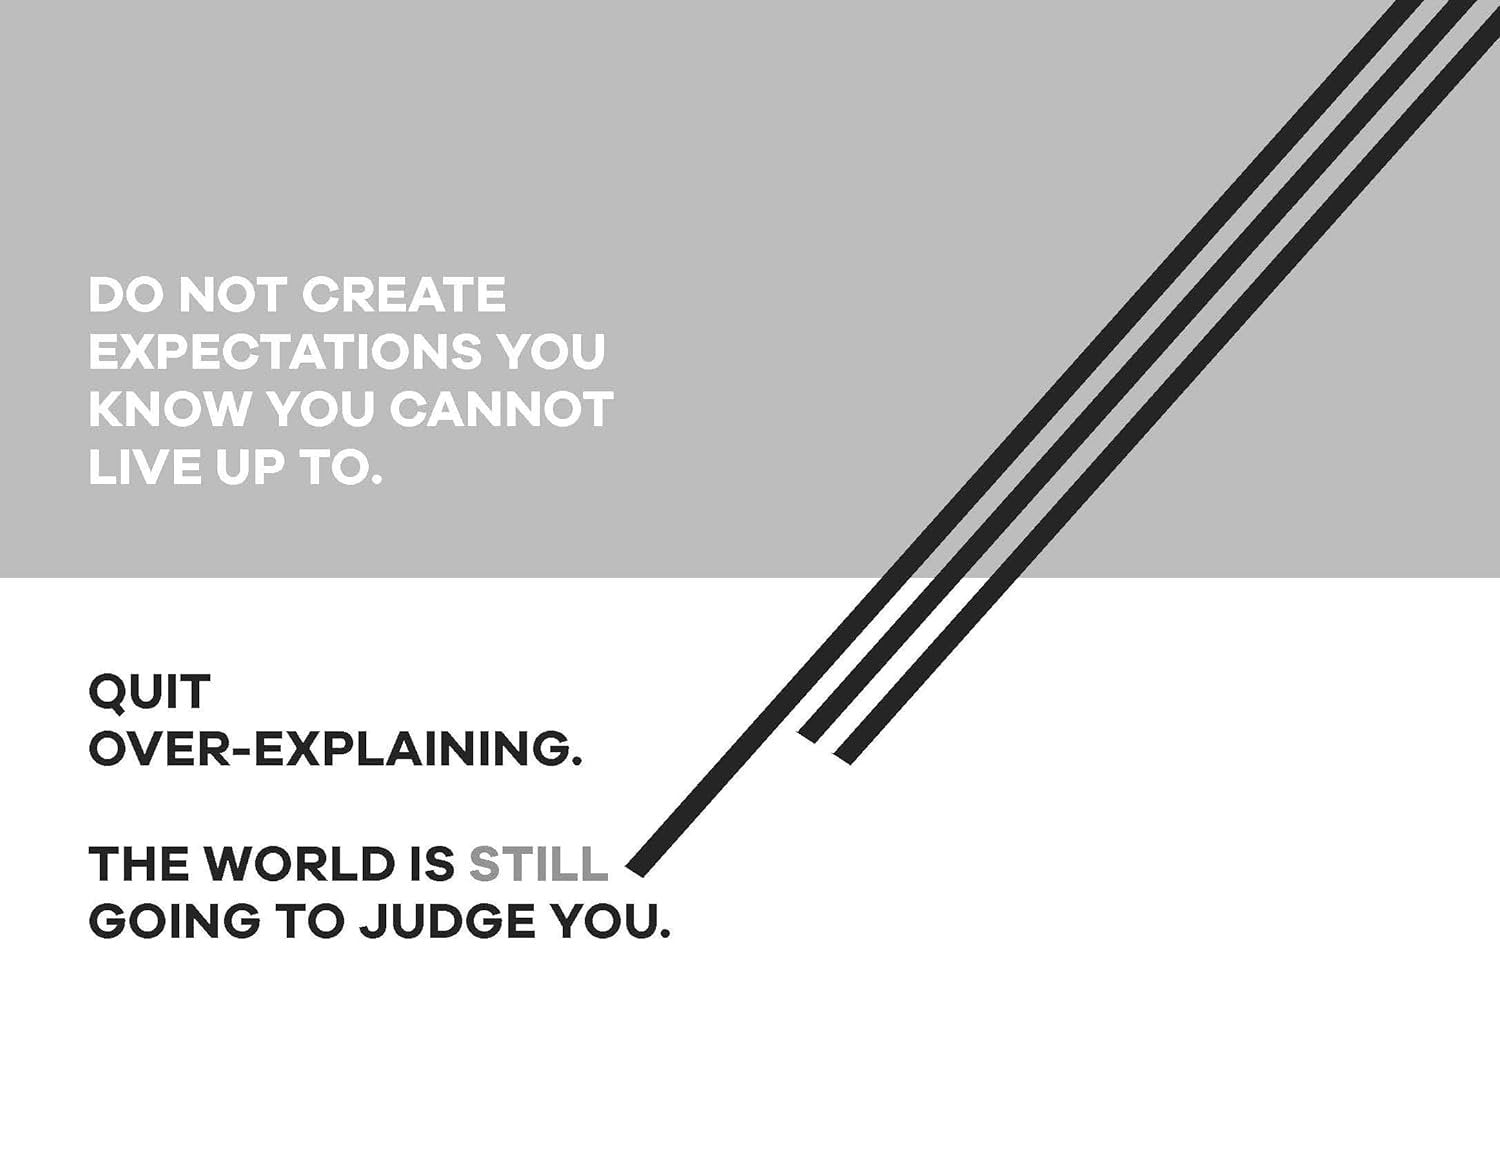 This image features a minimalist black and white design with text excerpted from Chidera Eggerue's self-help journal "What a Time to Journal: Work Out Why You Are Already Enough" by Chidera Eggerue (Author) that reads: "do not create expectations you